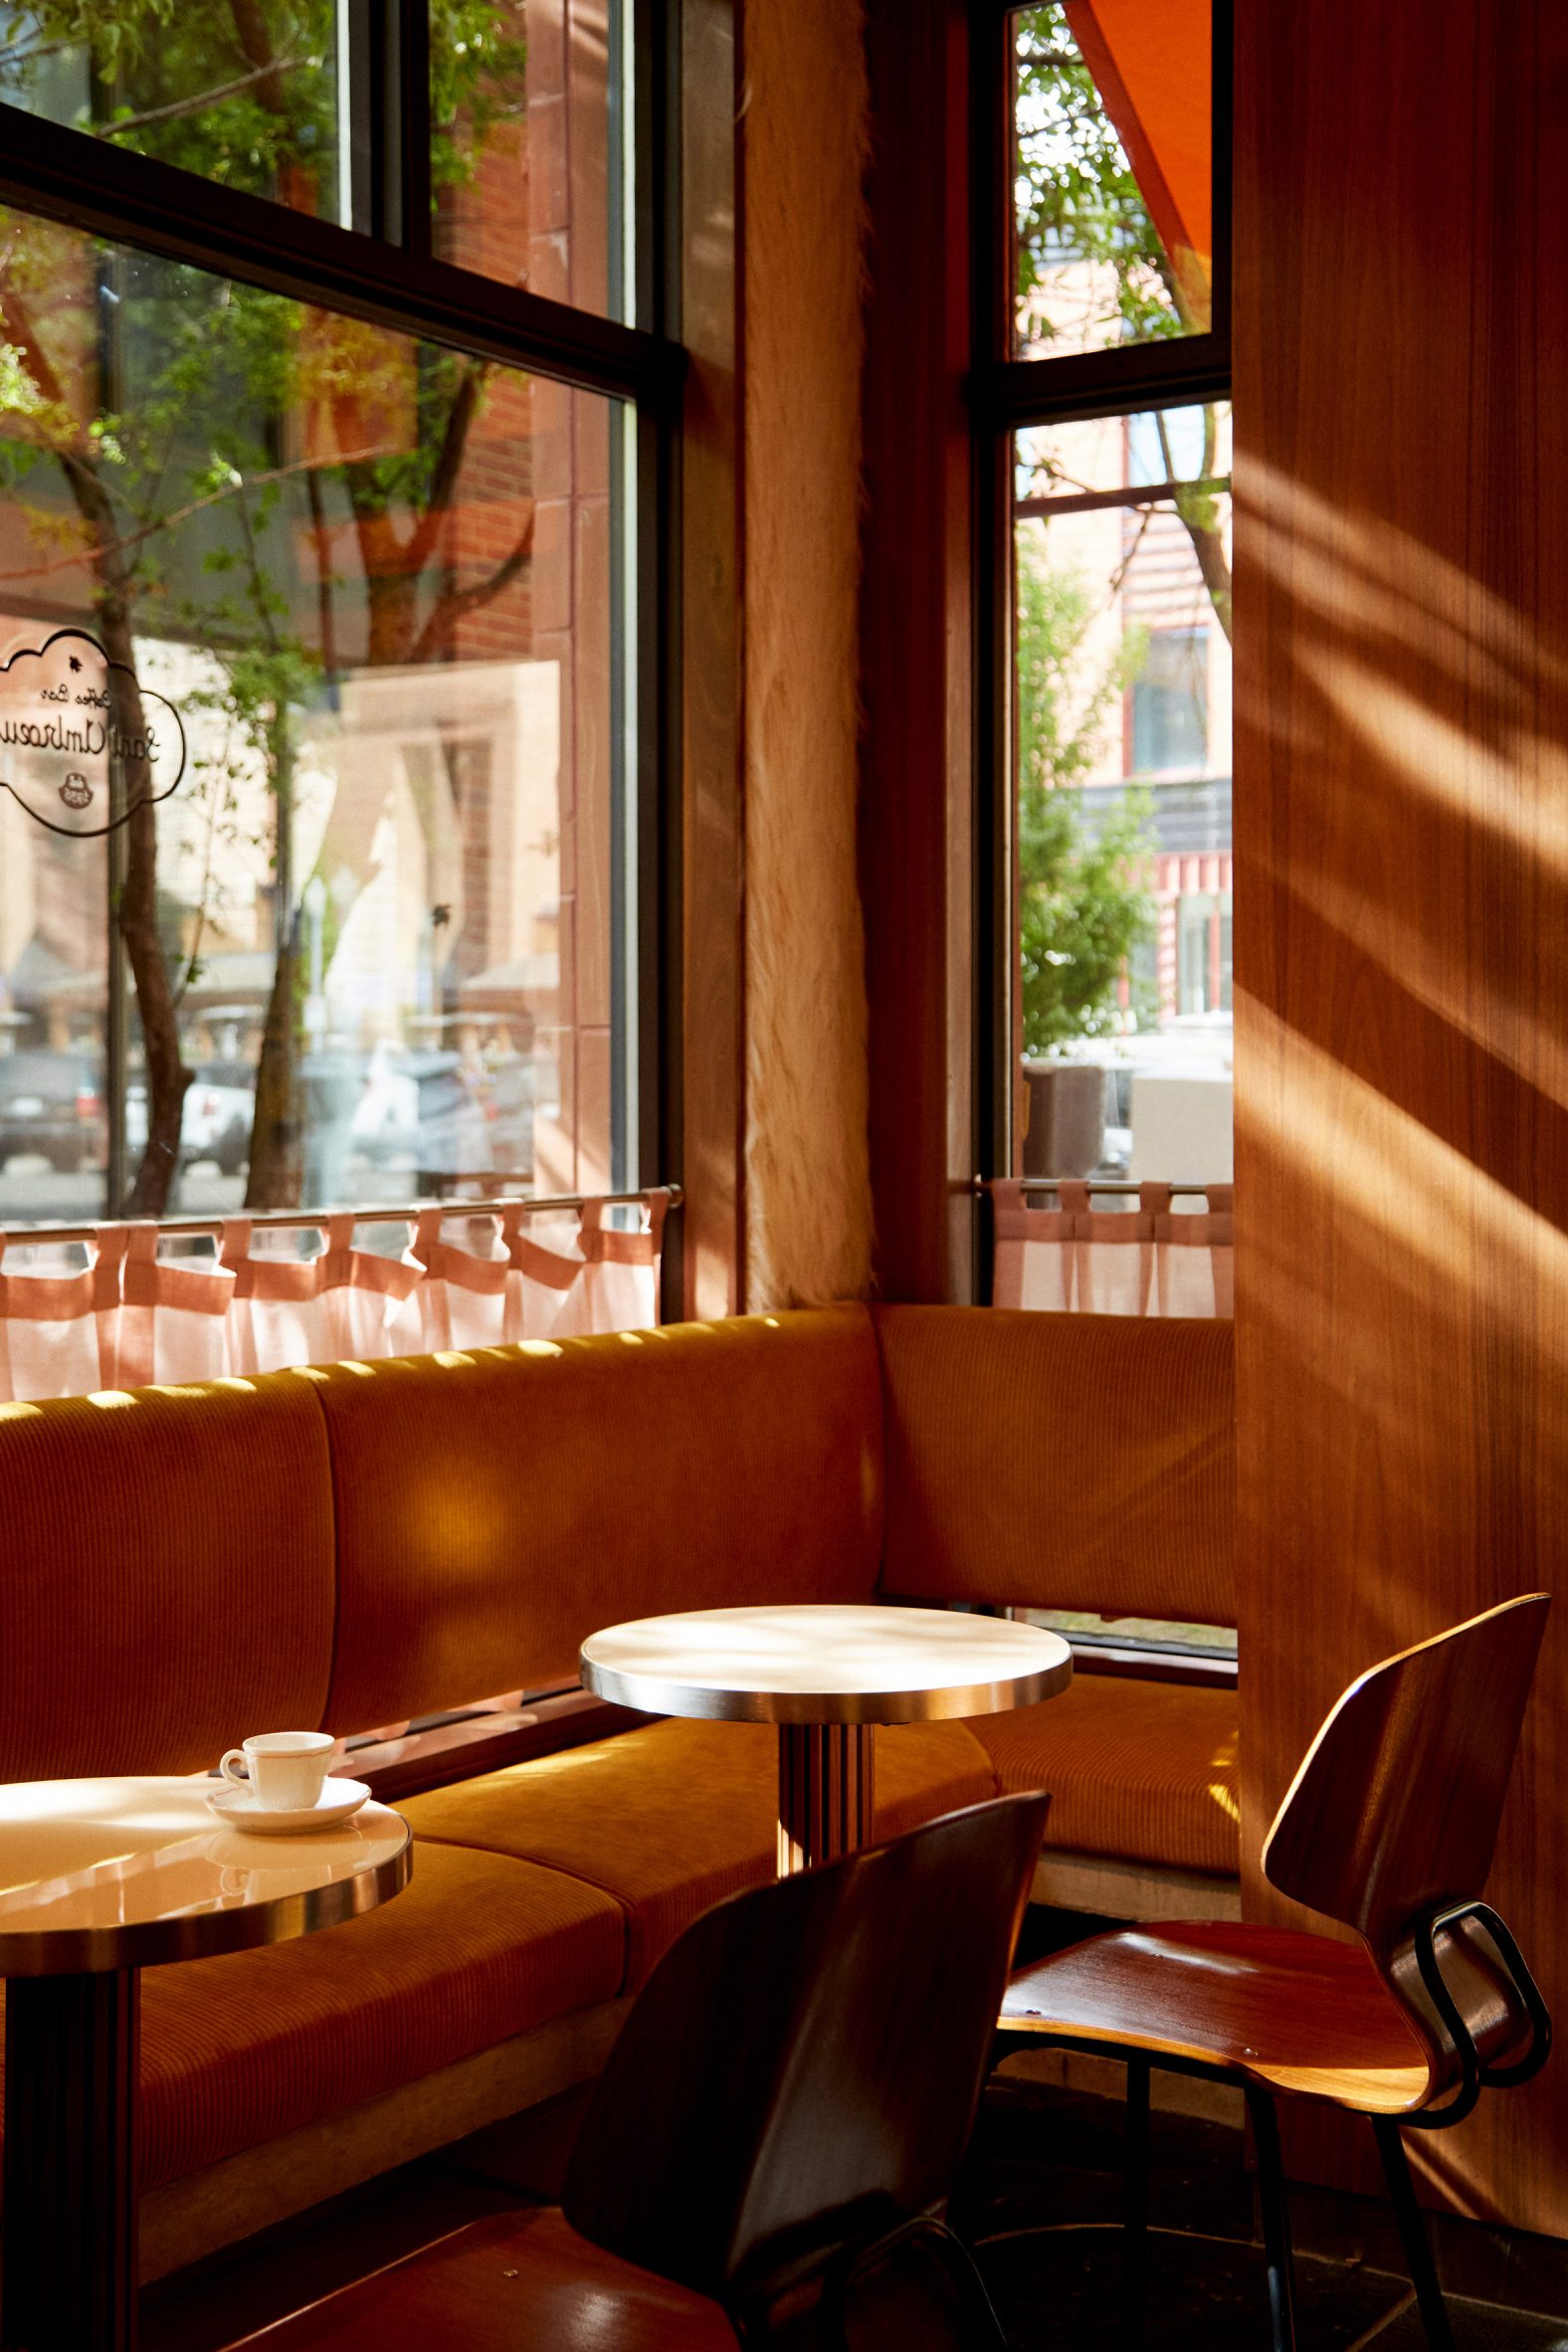 Seating in the cafe window with shadows patterning the walls